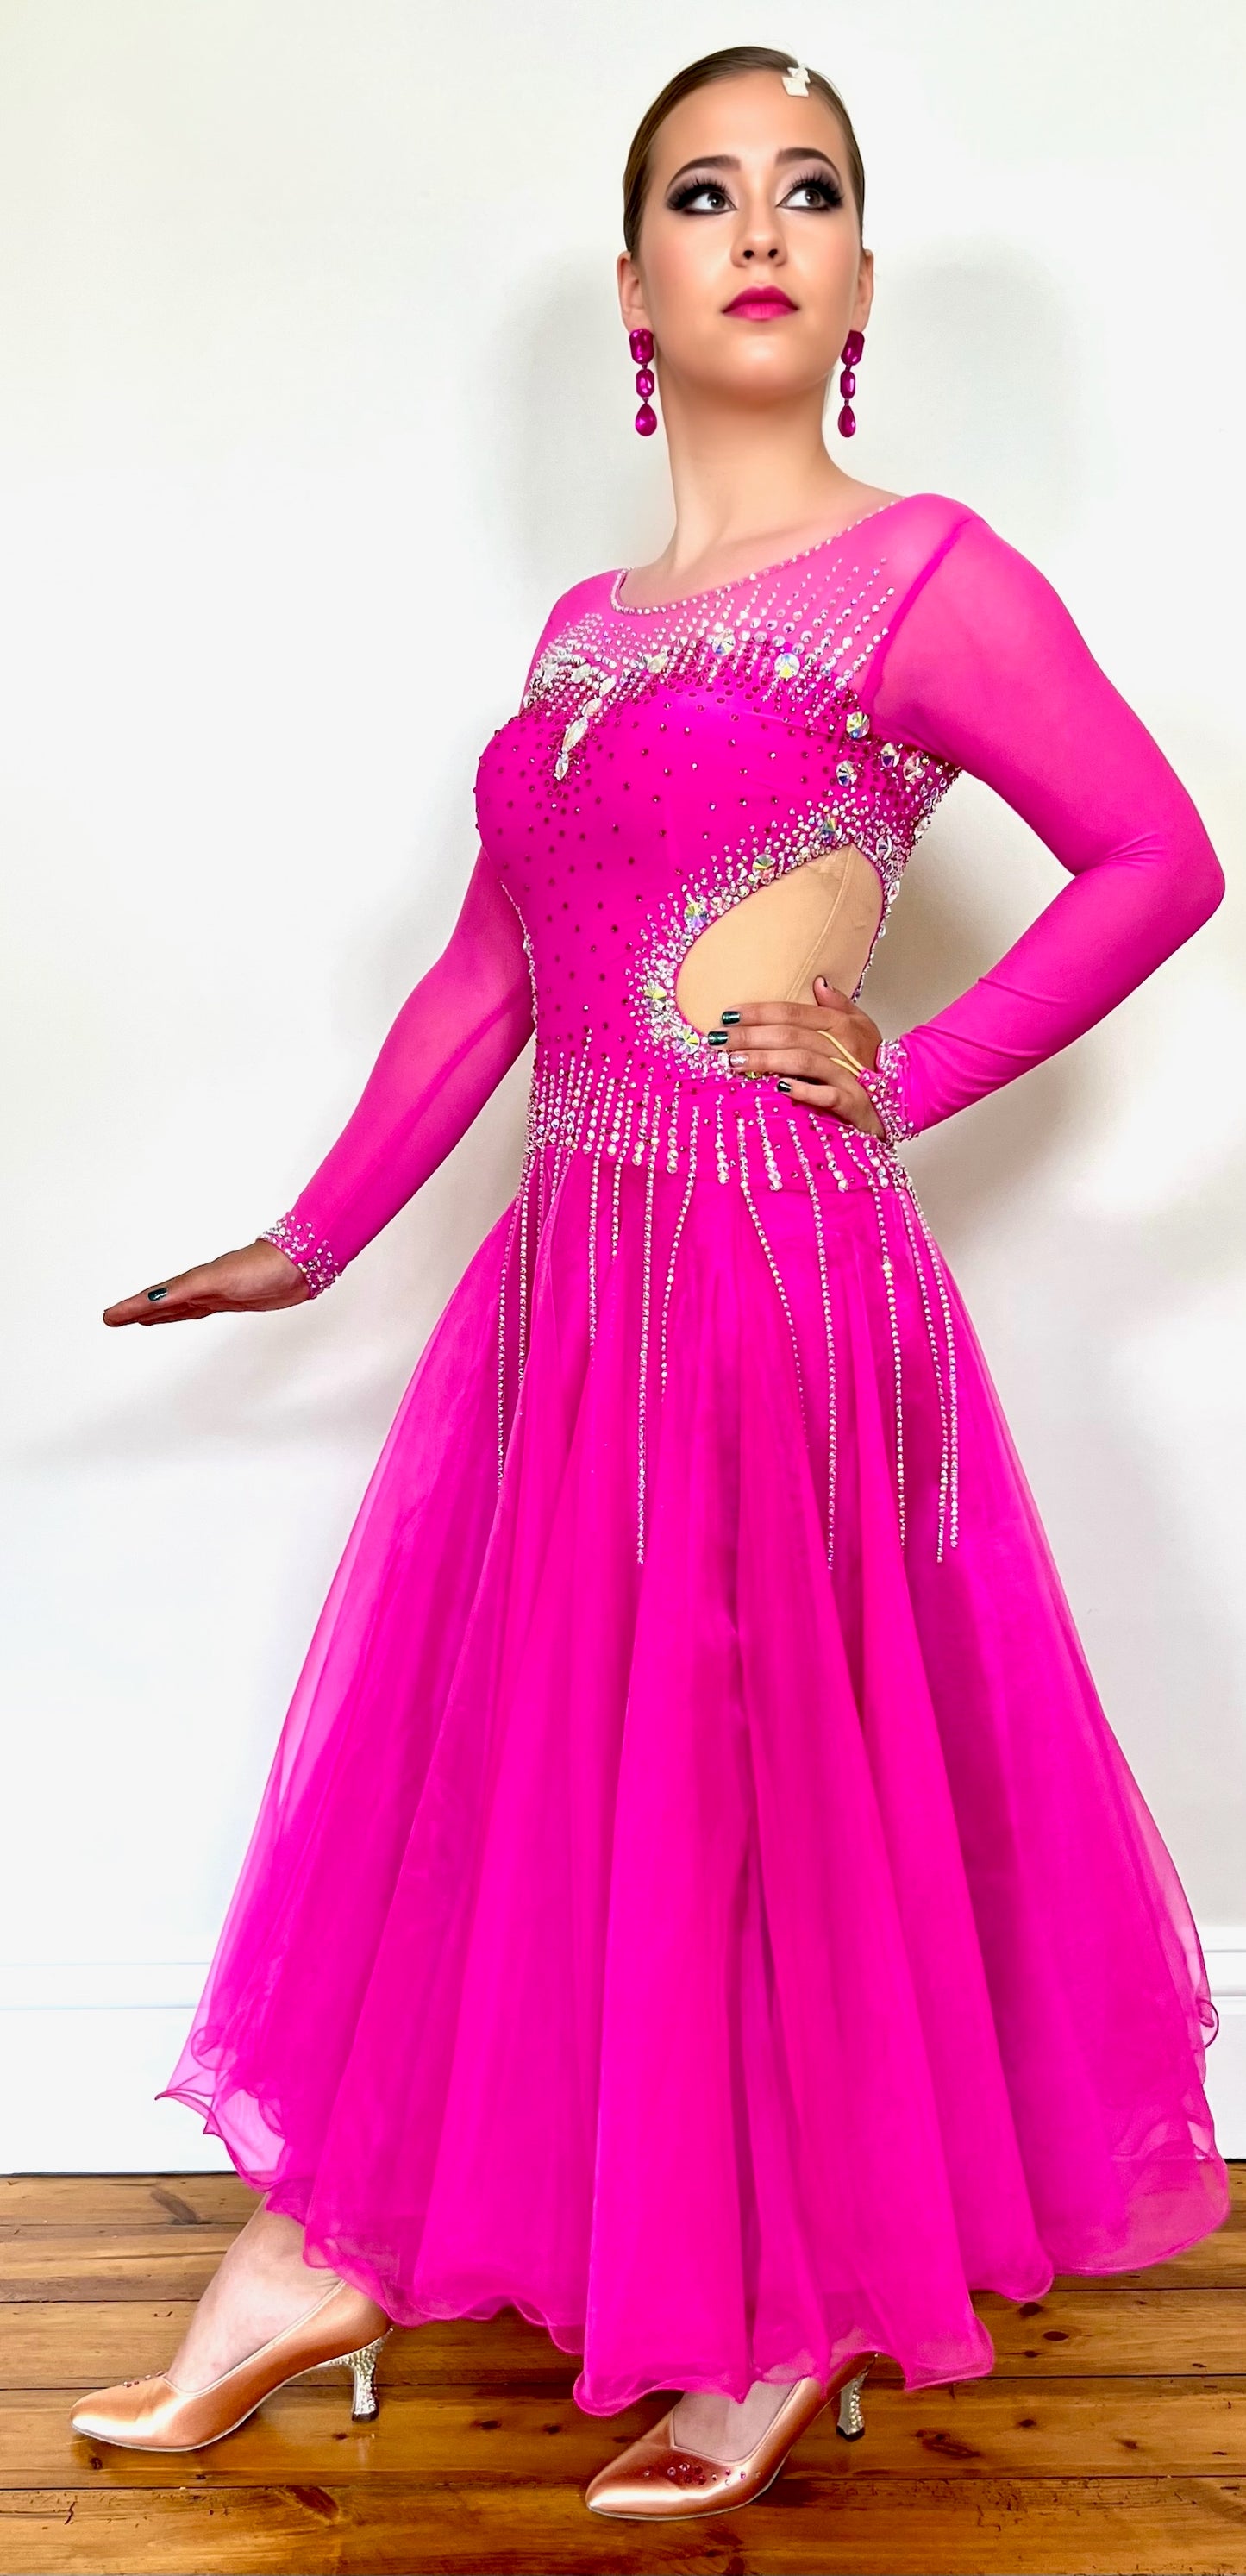 002 Fuchsia Pink flesh side panel Ballroom Dress. AB stoned material droppers from the waist stoned with Ab throughout